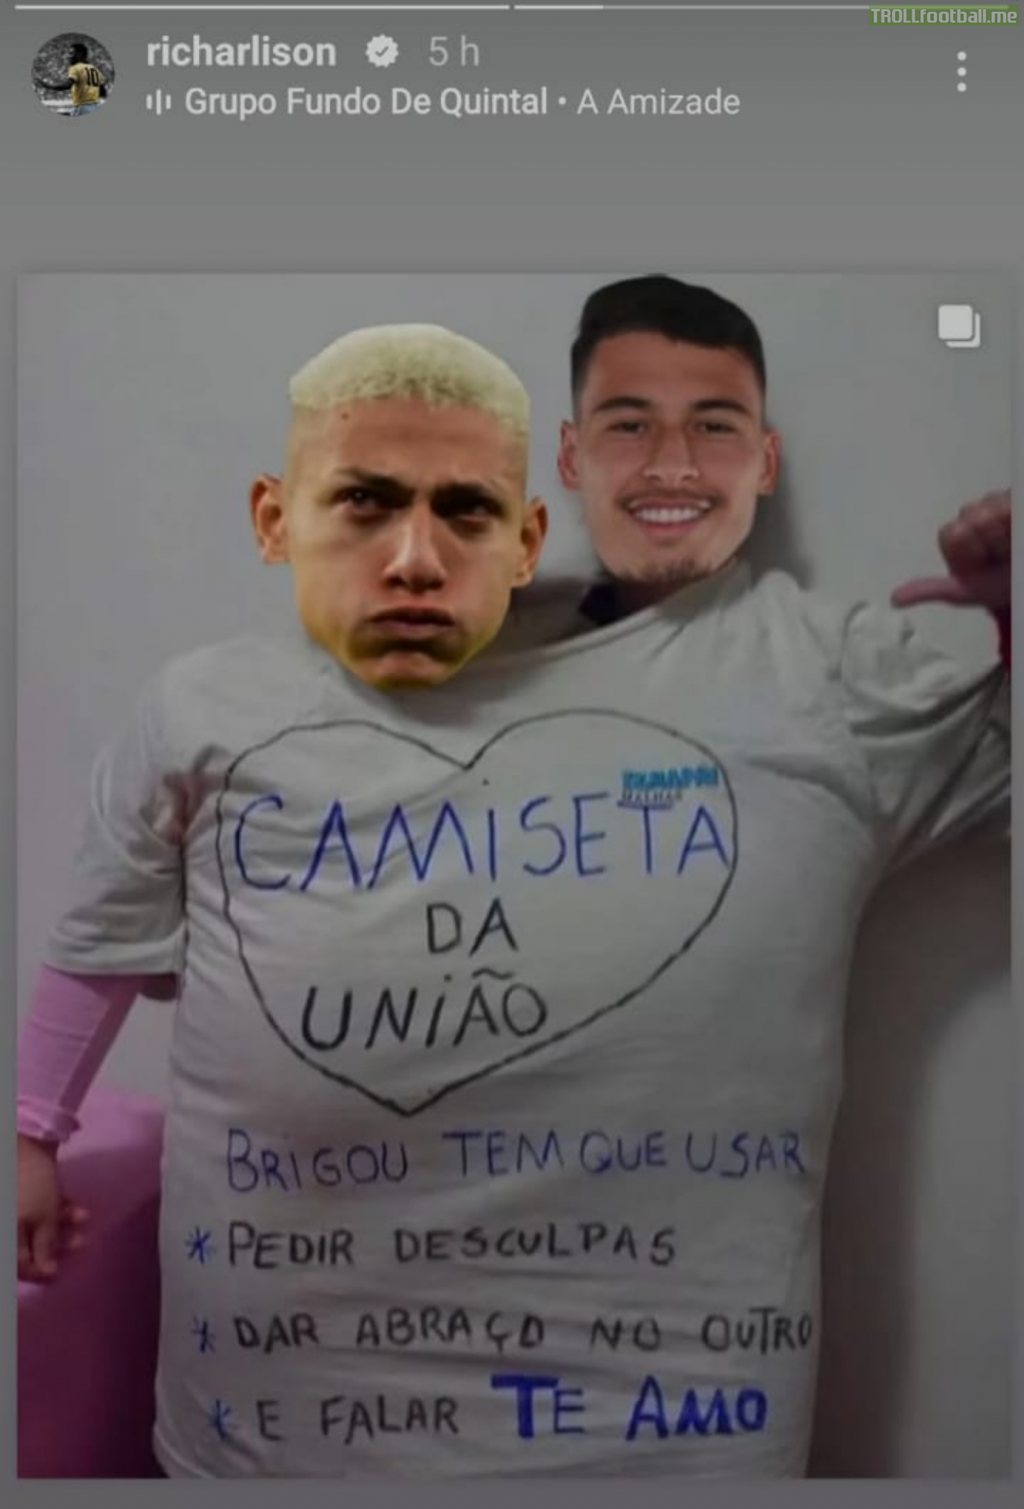 Richarlison insta story meme regarding Martinelli: "T-shirt of union. If you fight, you must wear it. Apologize. Hug it out. Say 'I love you'"